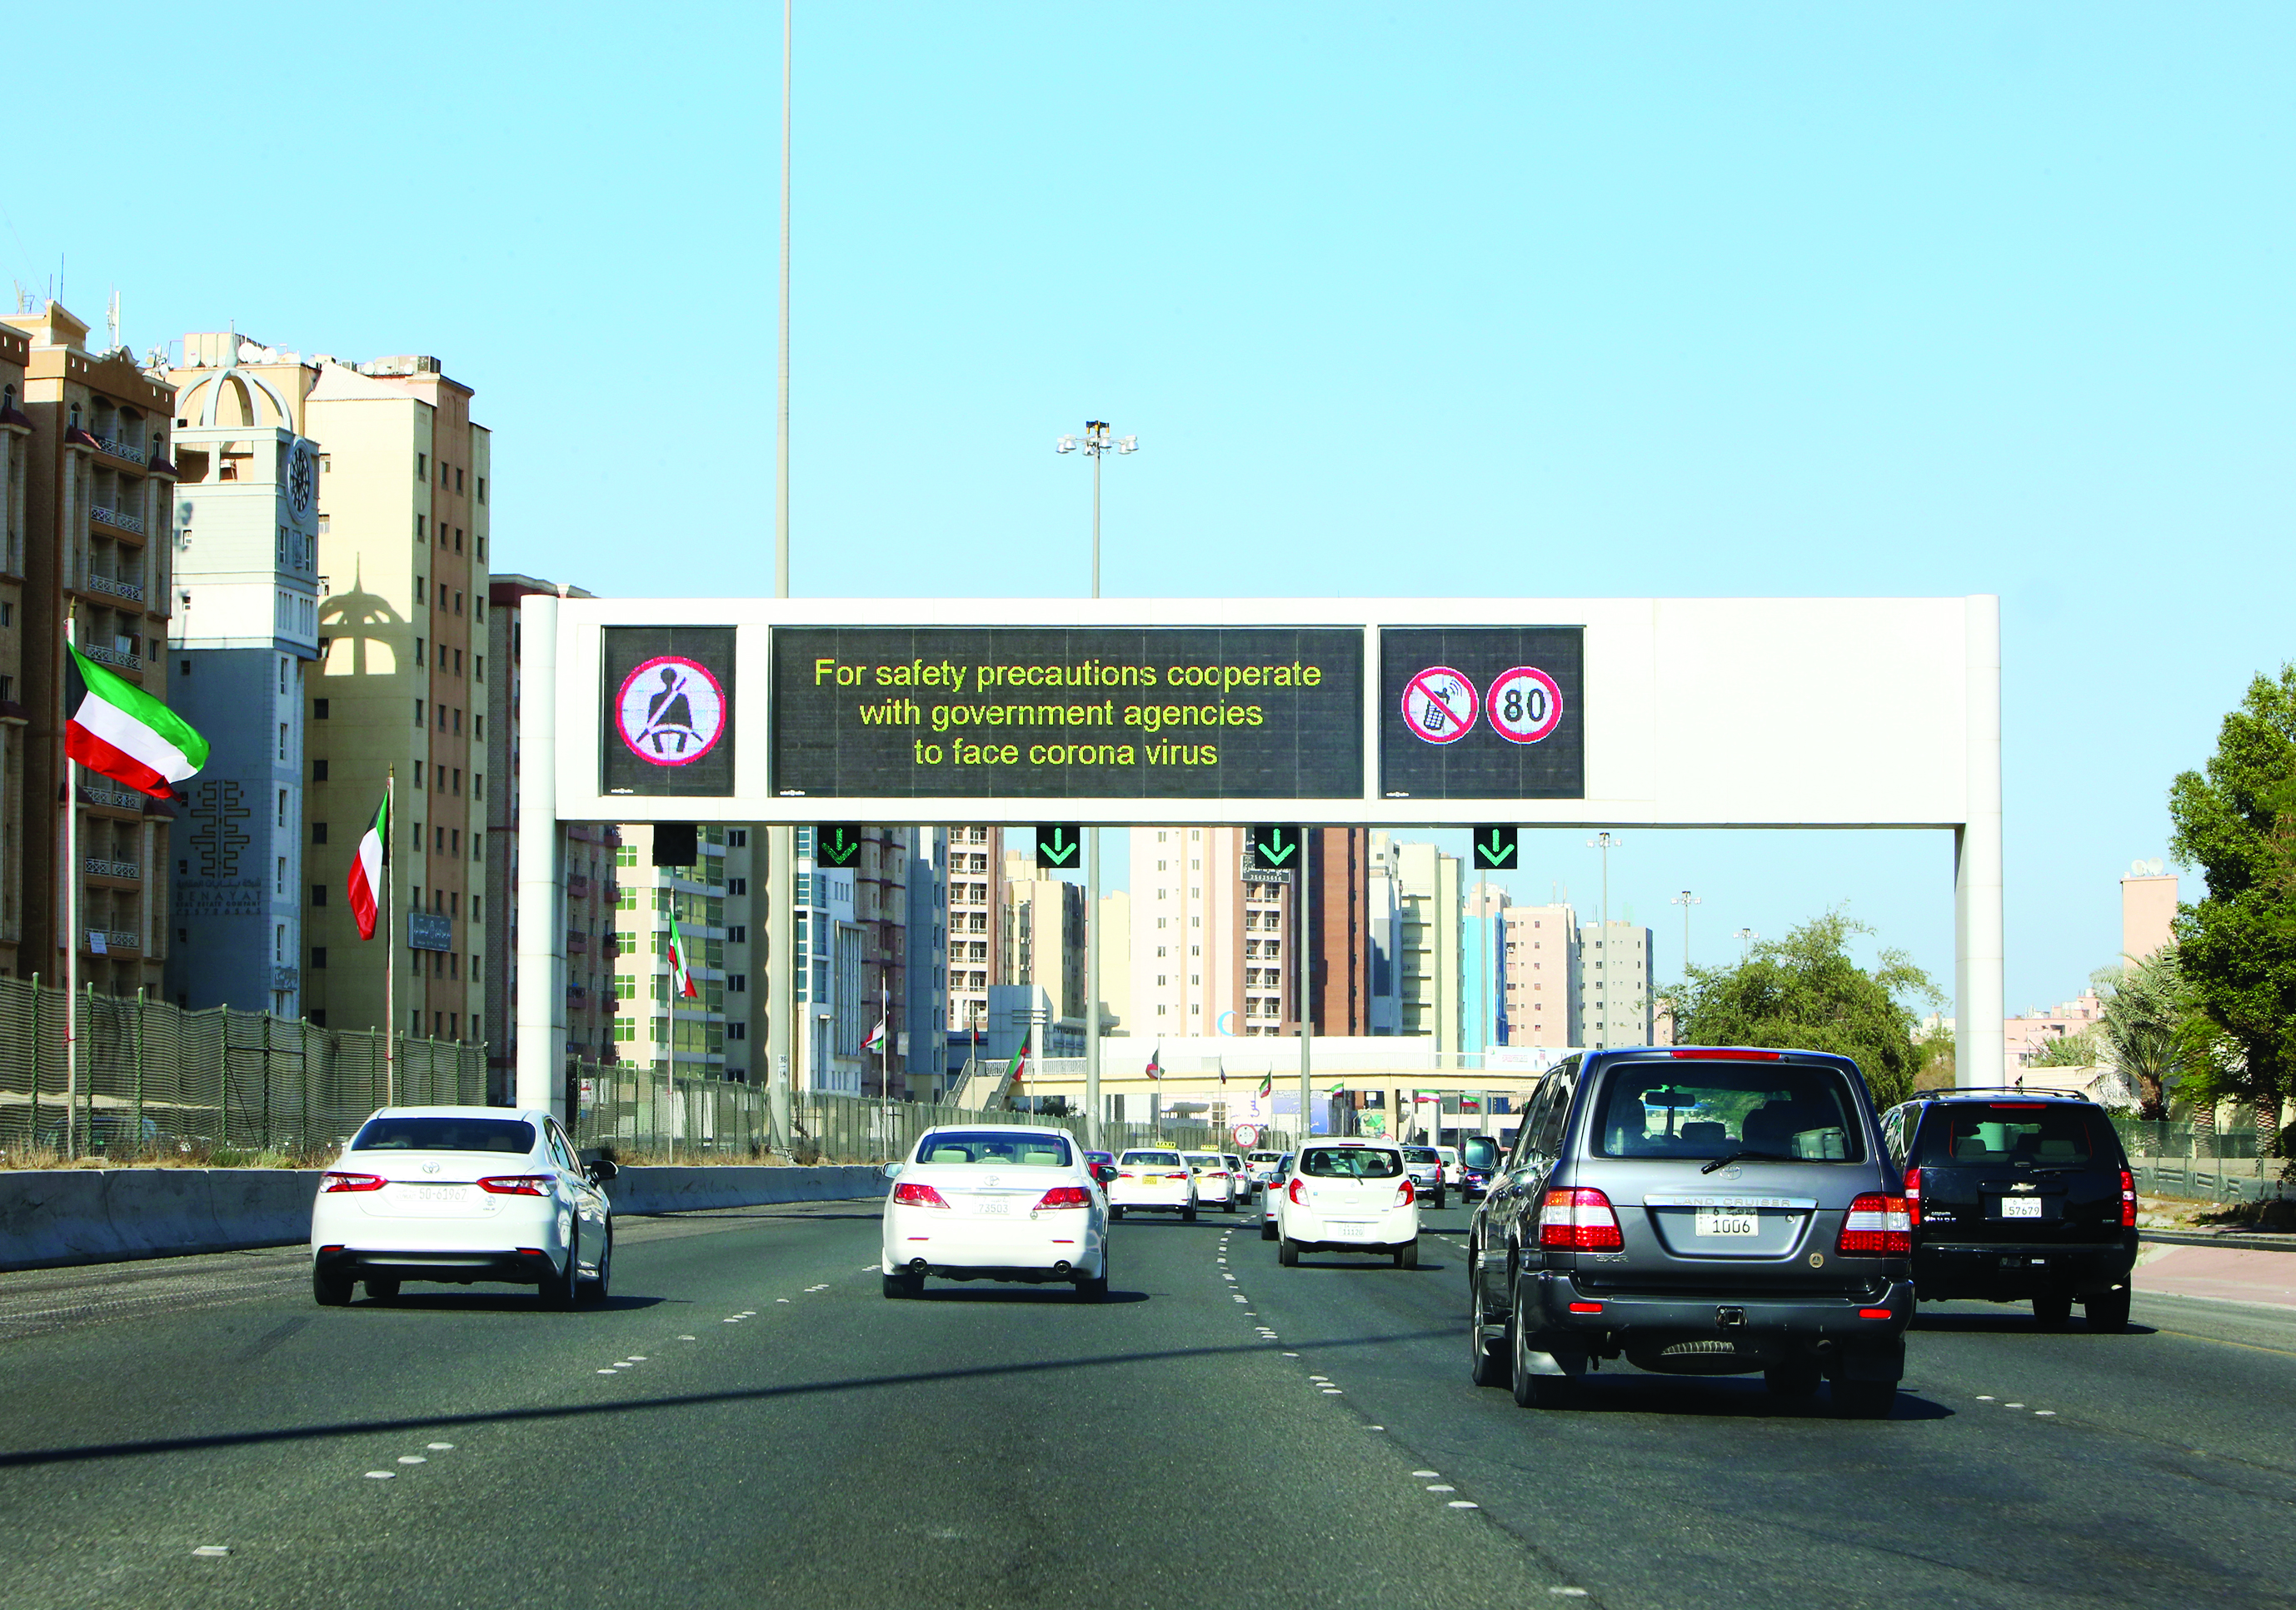 Vehicles pass by a billboard showing precautionary instructions against the coronavirus as they drive on a main highway in Kuwait City on March 3, 2020.